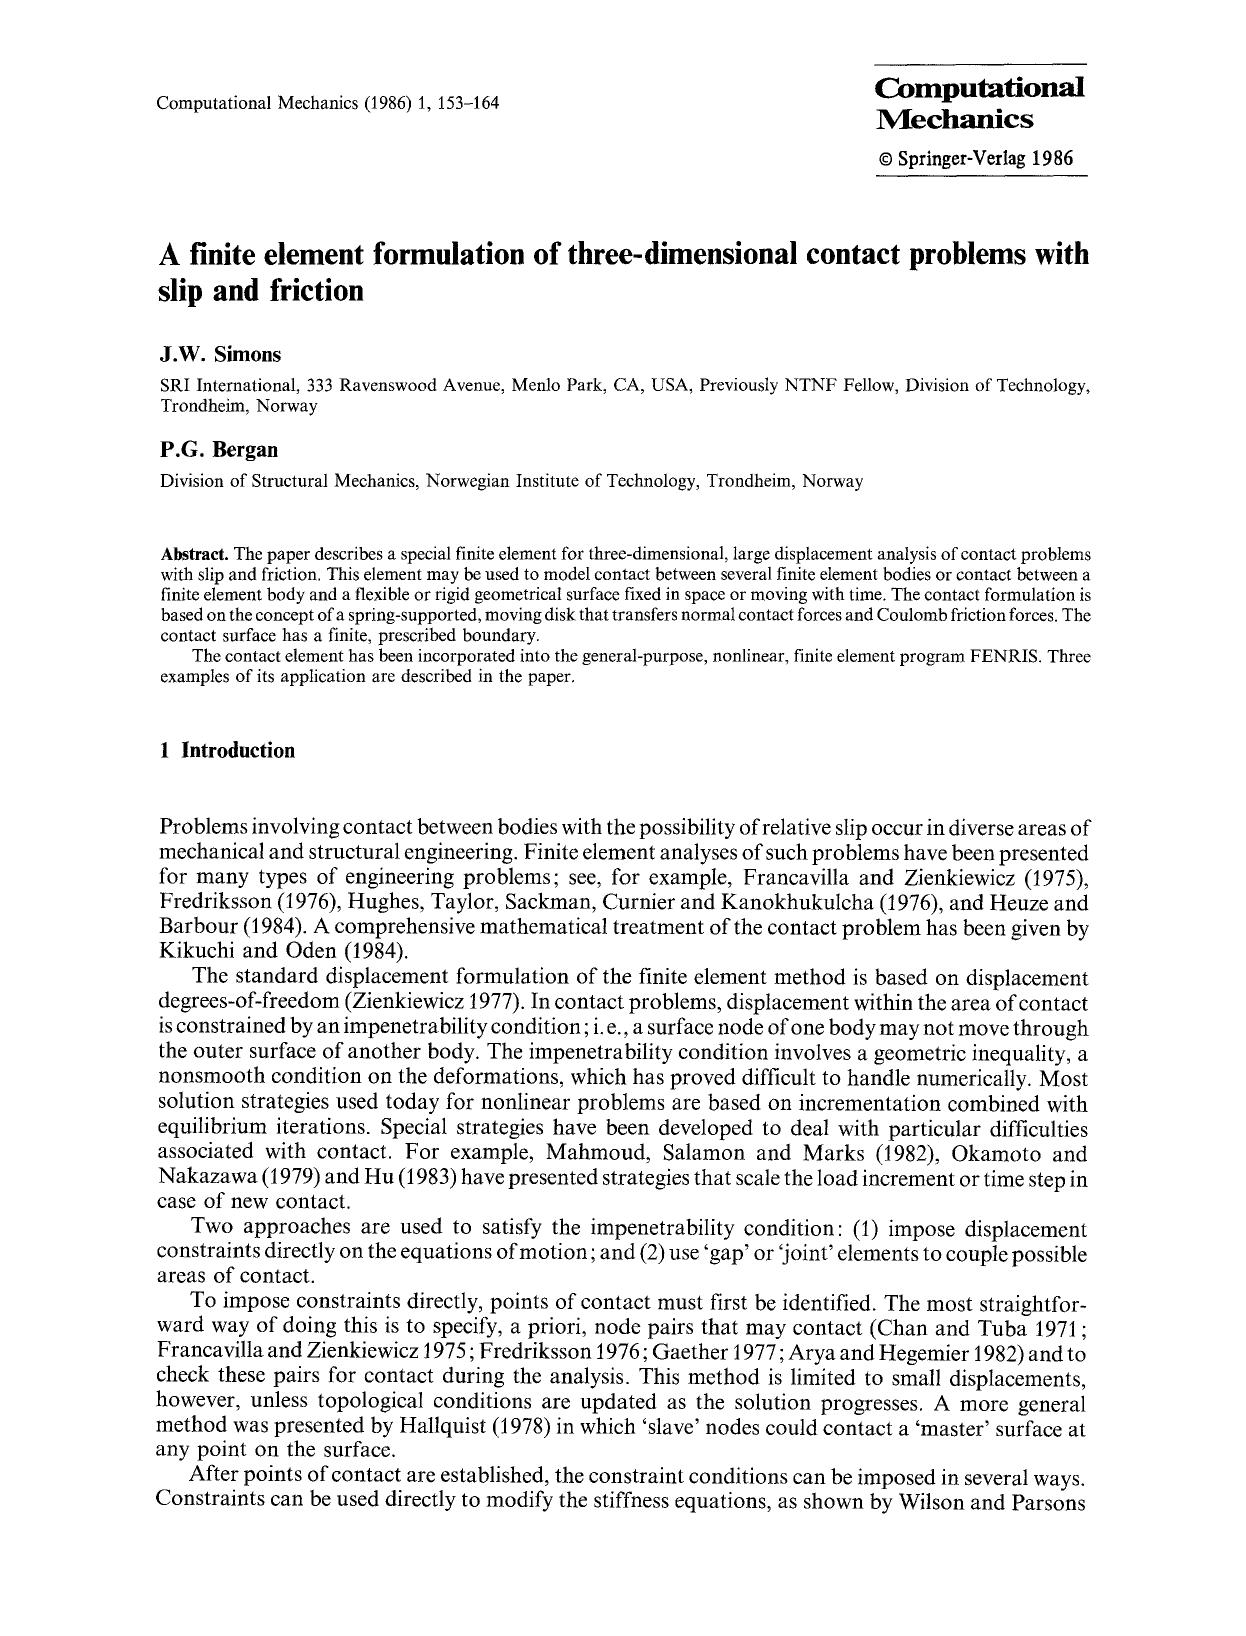 A finite element formulation of three-dimensional contact problems with slip and friction by Unknown